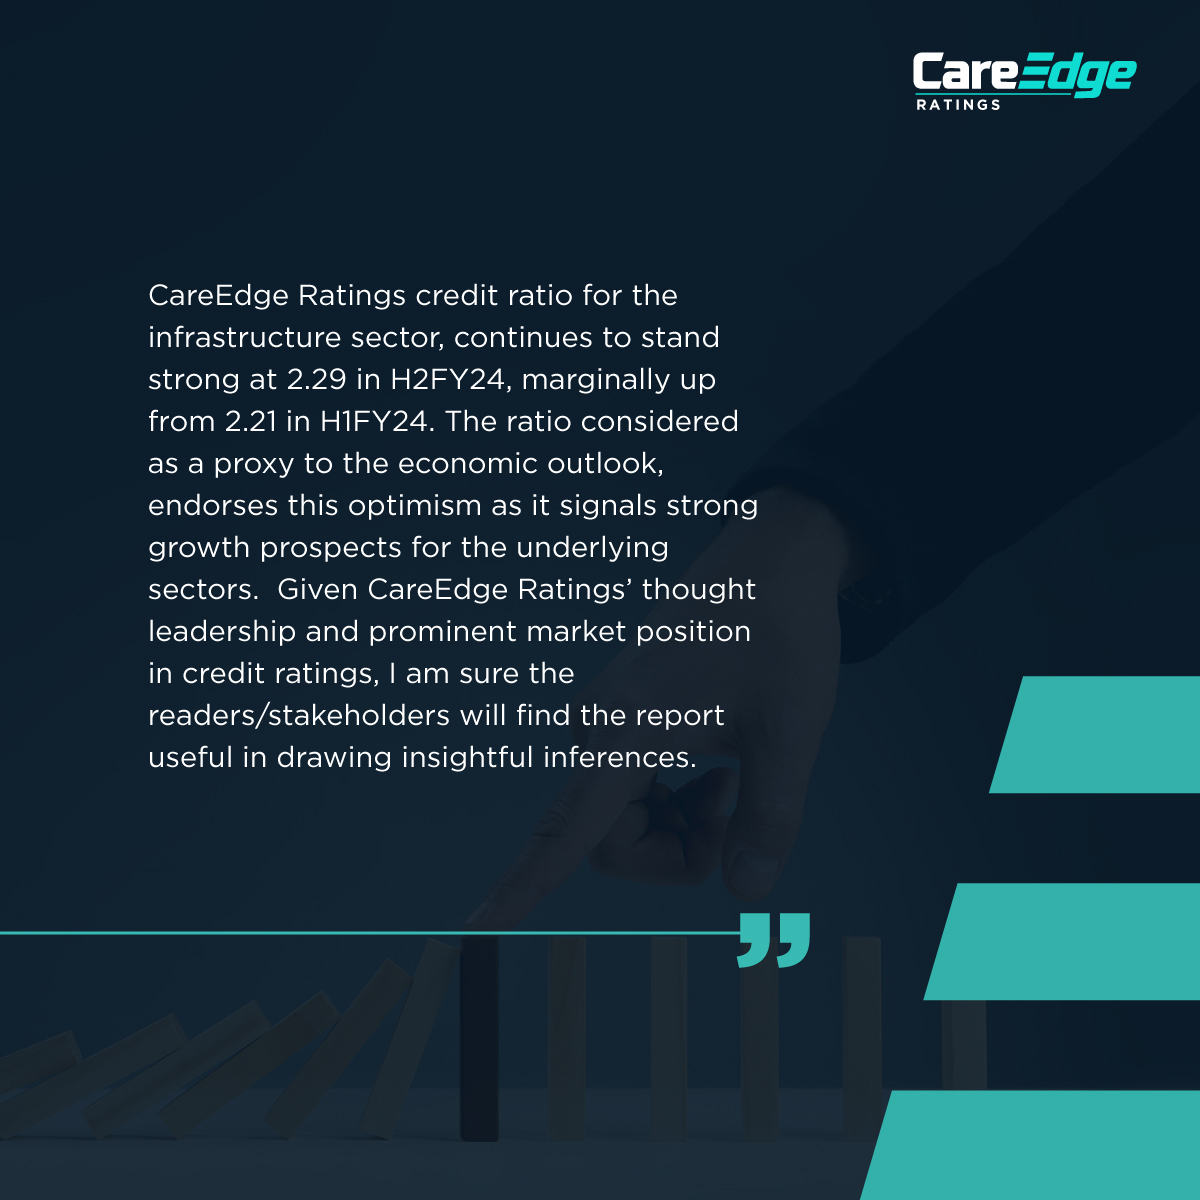 Shri @nitin_gadkari, Honourable Minister of Road, Transport and Highways of India, on the role of infrastructure in India’s growth and CareEdge Ratings’ Credit Ratio report. Full report: careratings.com/uploads/newsfi… #CareEdgeInsights #CareEdeRatings #CreditQualityAssessment